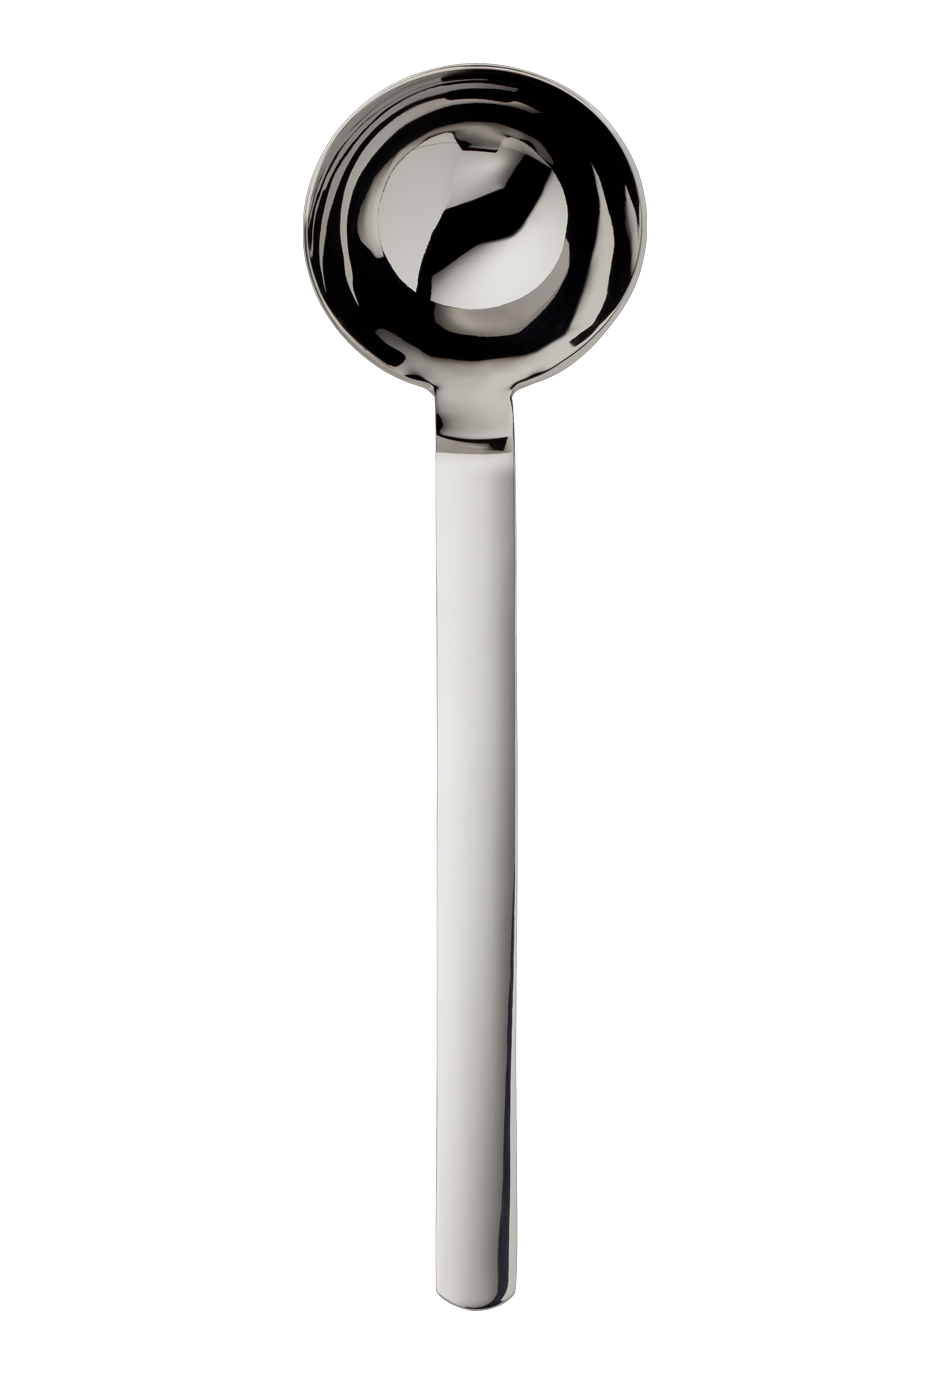 Topos Soup Ladle (18/8 stainless steel)